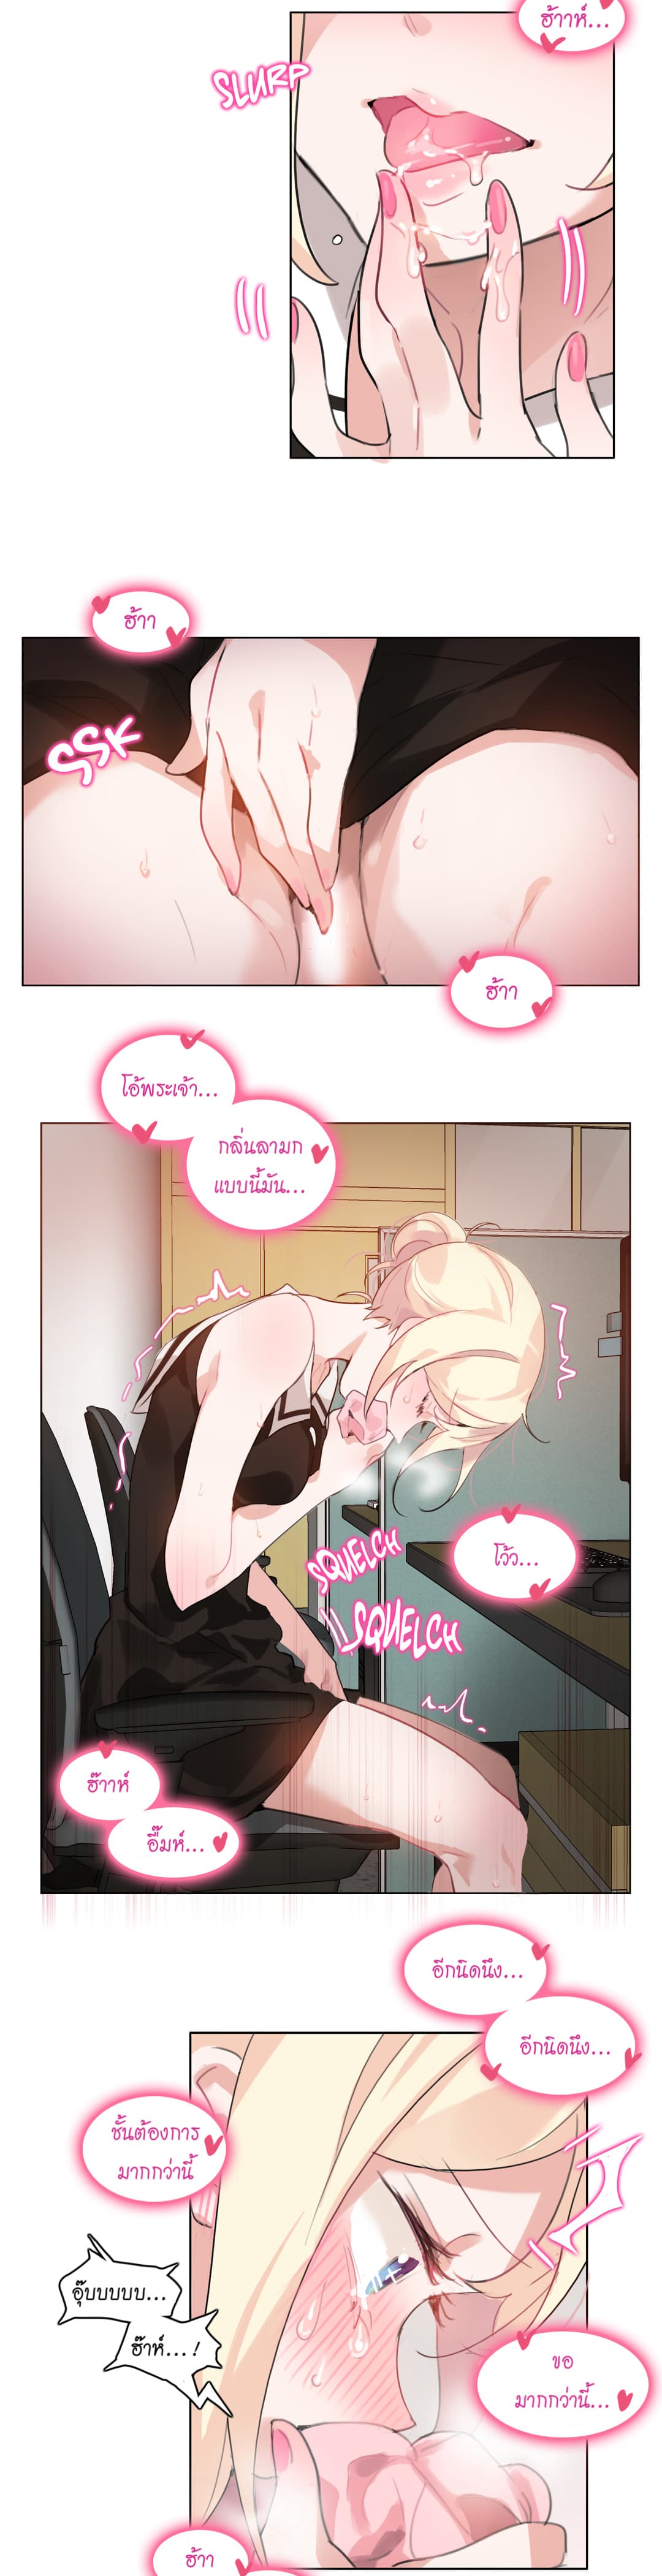 A Pervert’s Daily Life 14 (3)